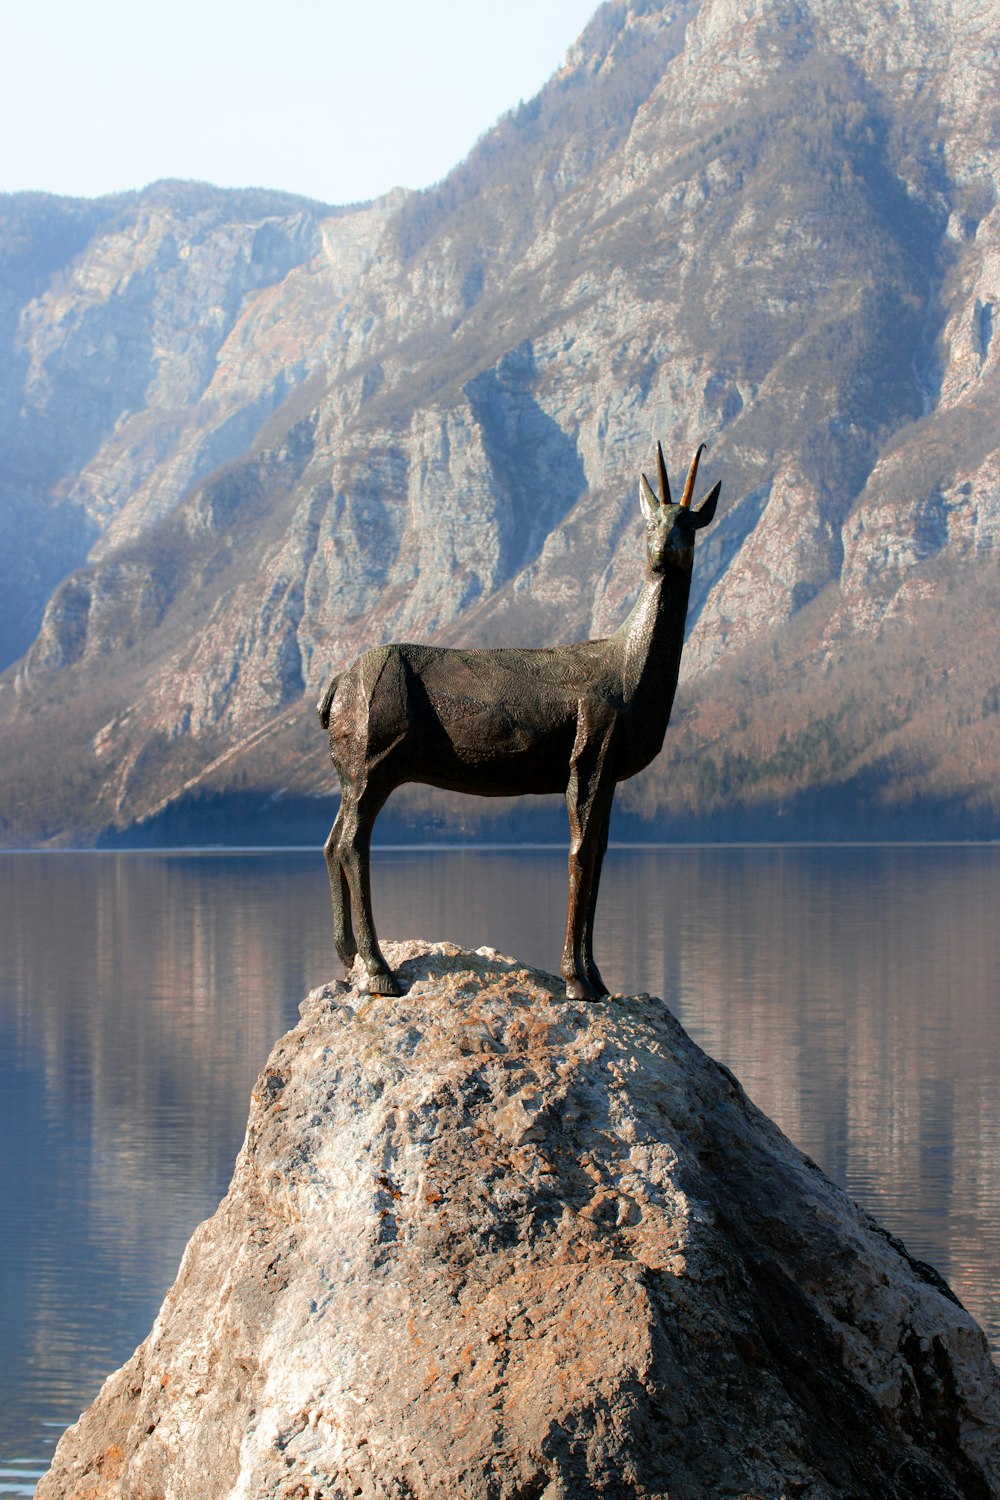 a statue of a goat stands on a rock in front of a mountain lake